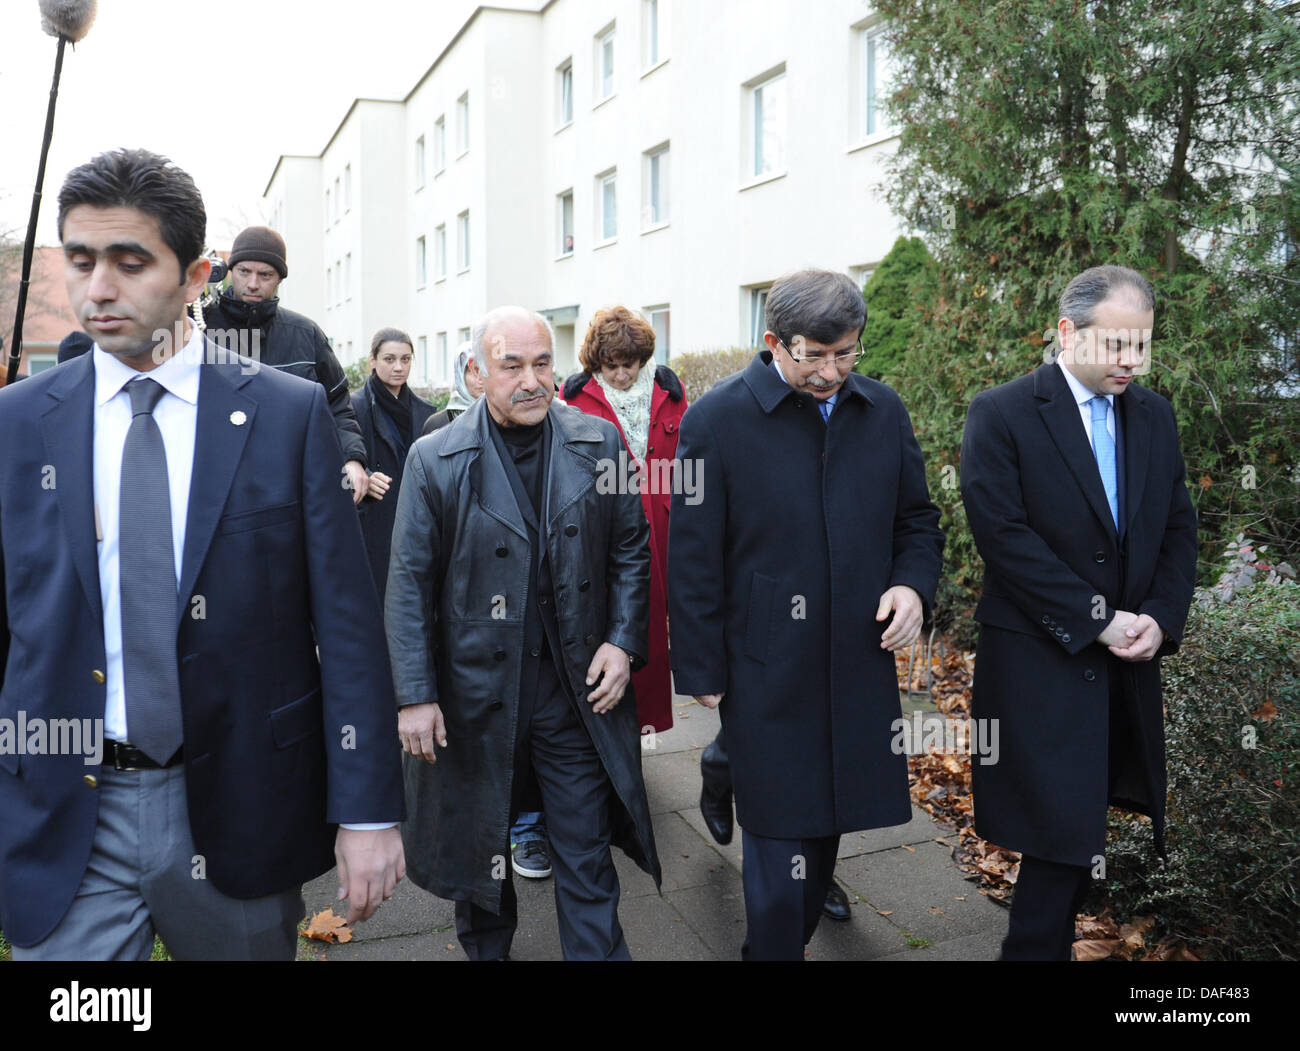 The Turkish Foreign Minister Ahmet Davutoglu (2-R) and Ali Taskopru (C), father of a vegetable seller murdered in 2001, walk past the victim's house in Hamburg, Germany, 01 December 2011. During his trip through Germany, Davutoglu visits several family members of victims of the Zwickau-based neo-Nazi terror cell. In his four-day-trip, Davutoglu will also visit Wiesbaden, Frankfurt, Stock Photo